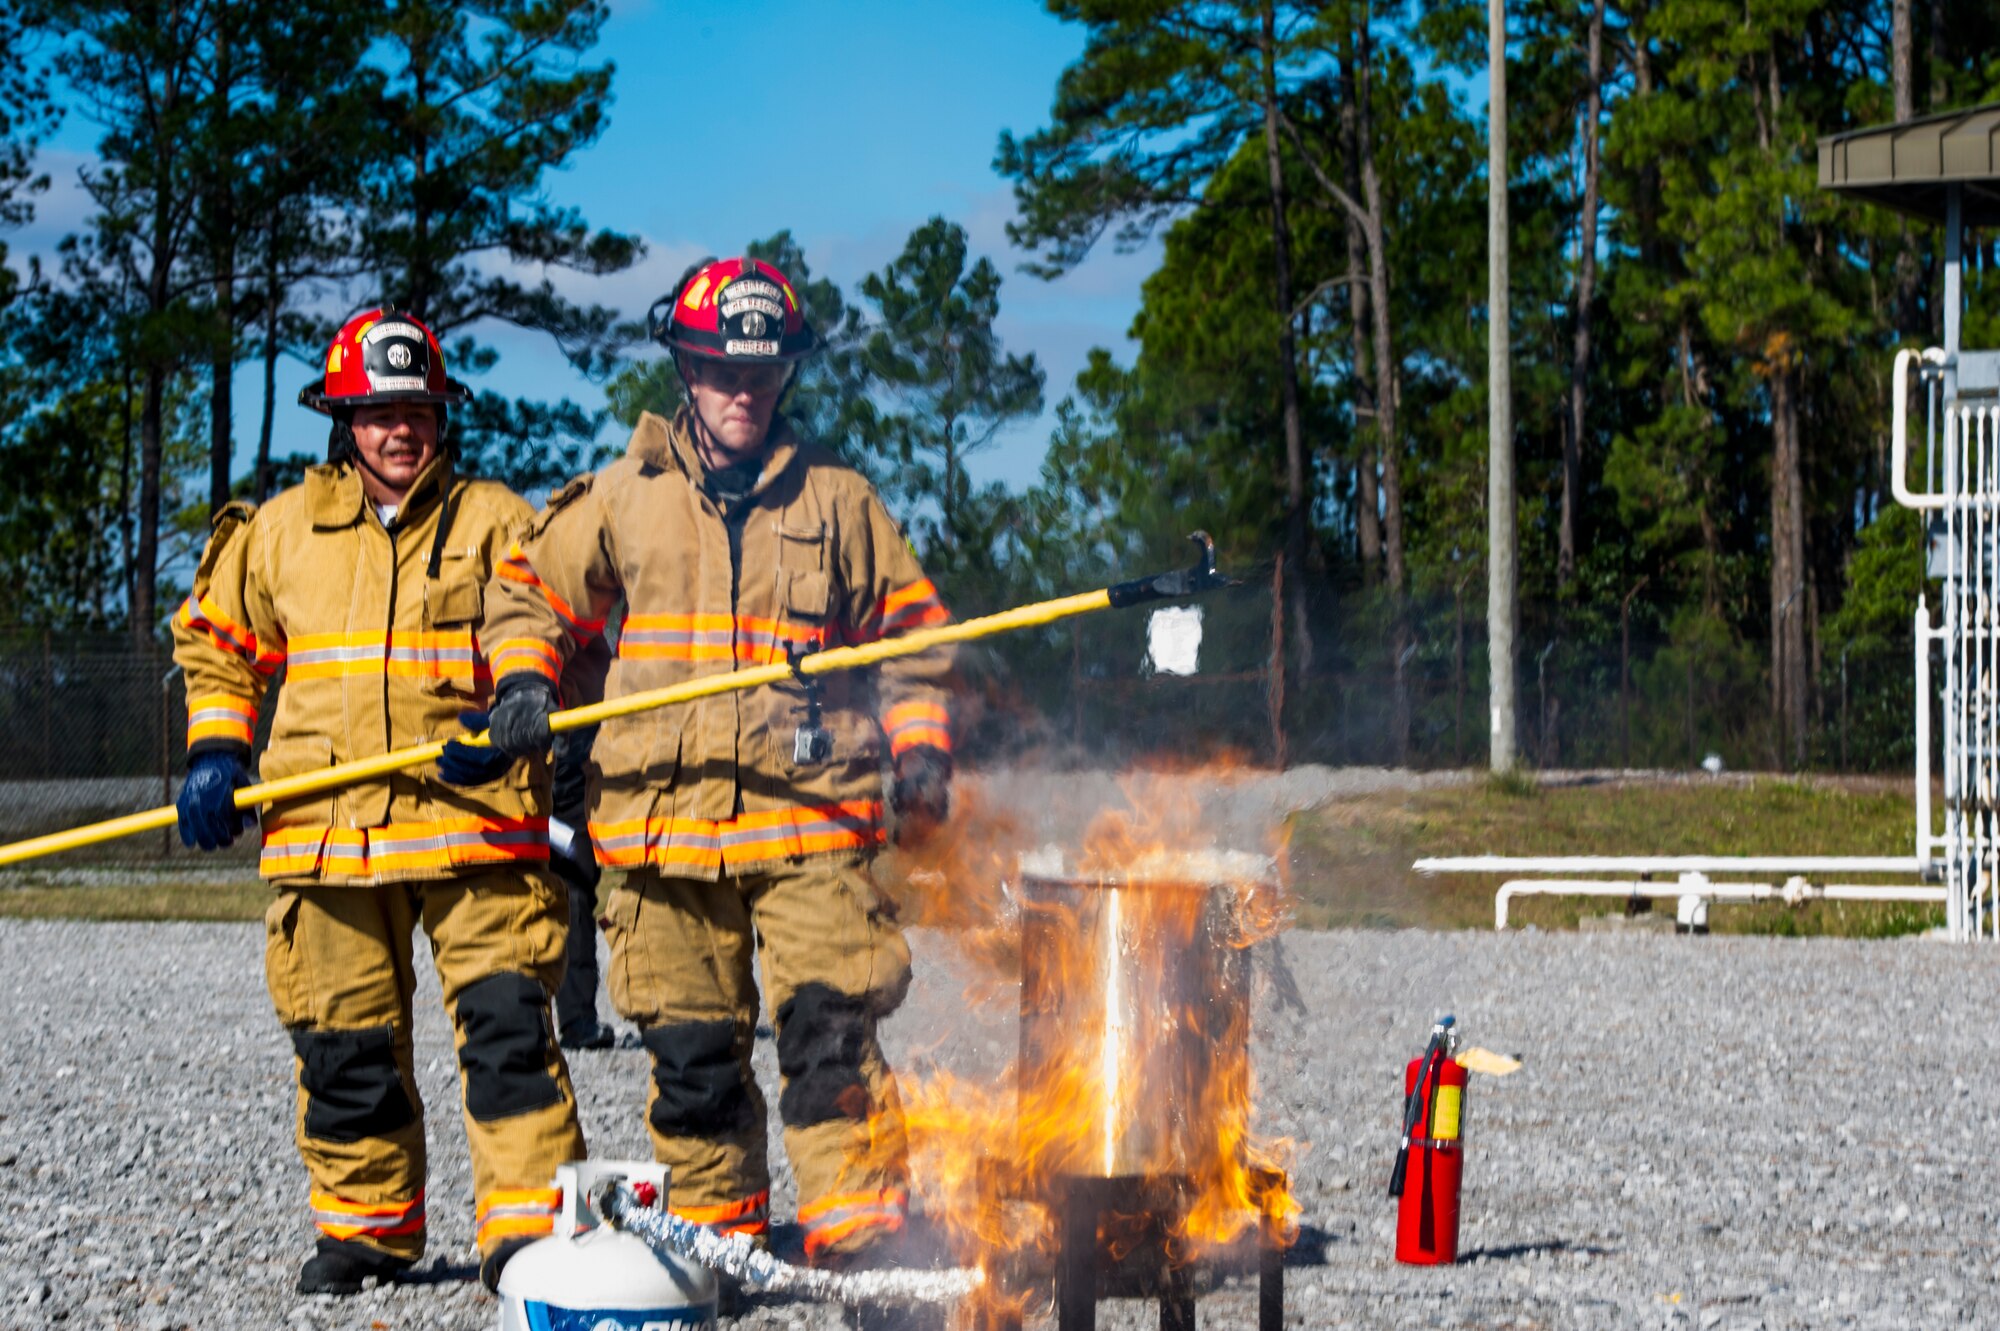 Firefighters from the 1st Special Operations Civil Engineer Squadron observe a fire break out during a safety demonstration at the fire training area on Hurlburt Field, Fla., Nov. 27, 2013. Placing a frozen or wet turkey into a fryer can result in a fire mishap. (U.S. Air Force photo/Senior Airman Christopher Callaway)